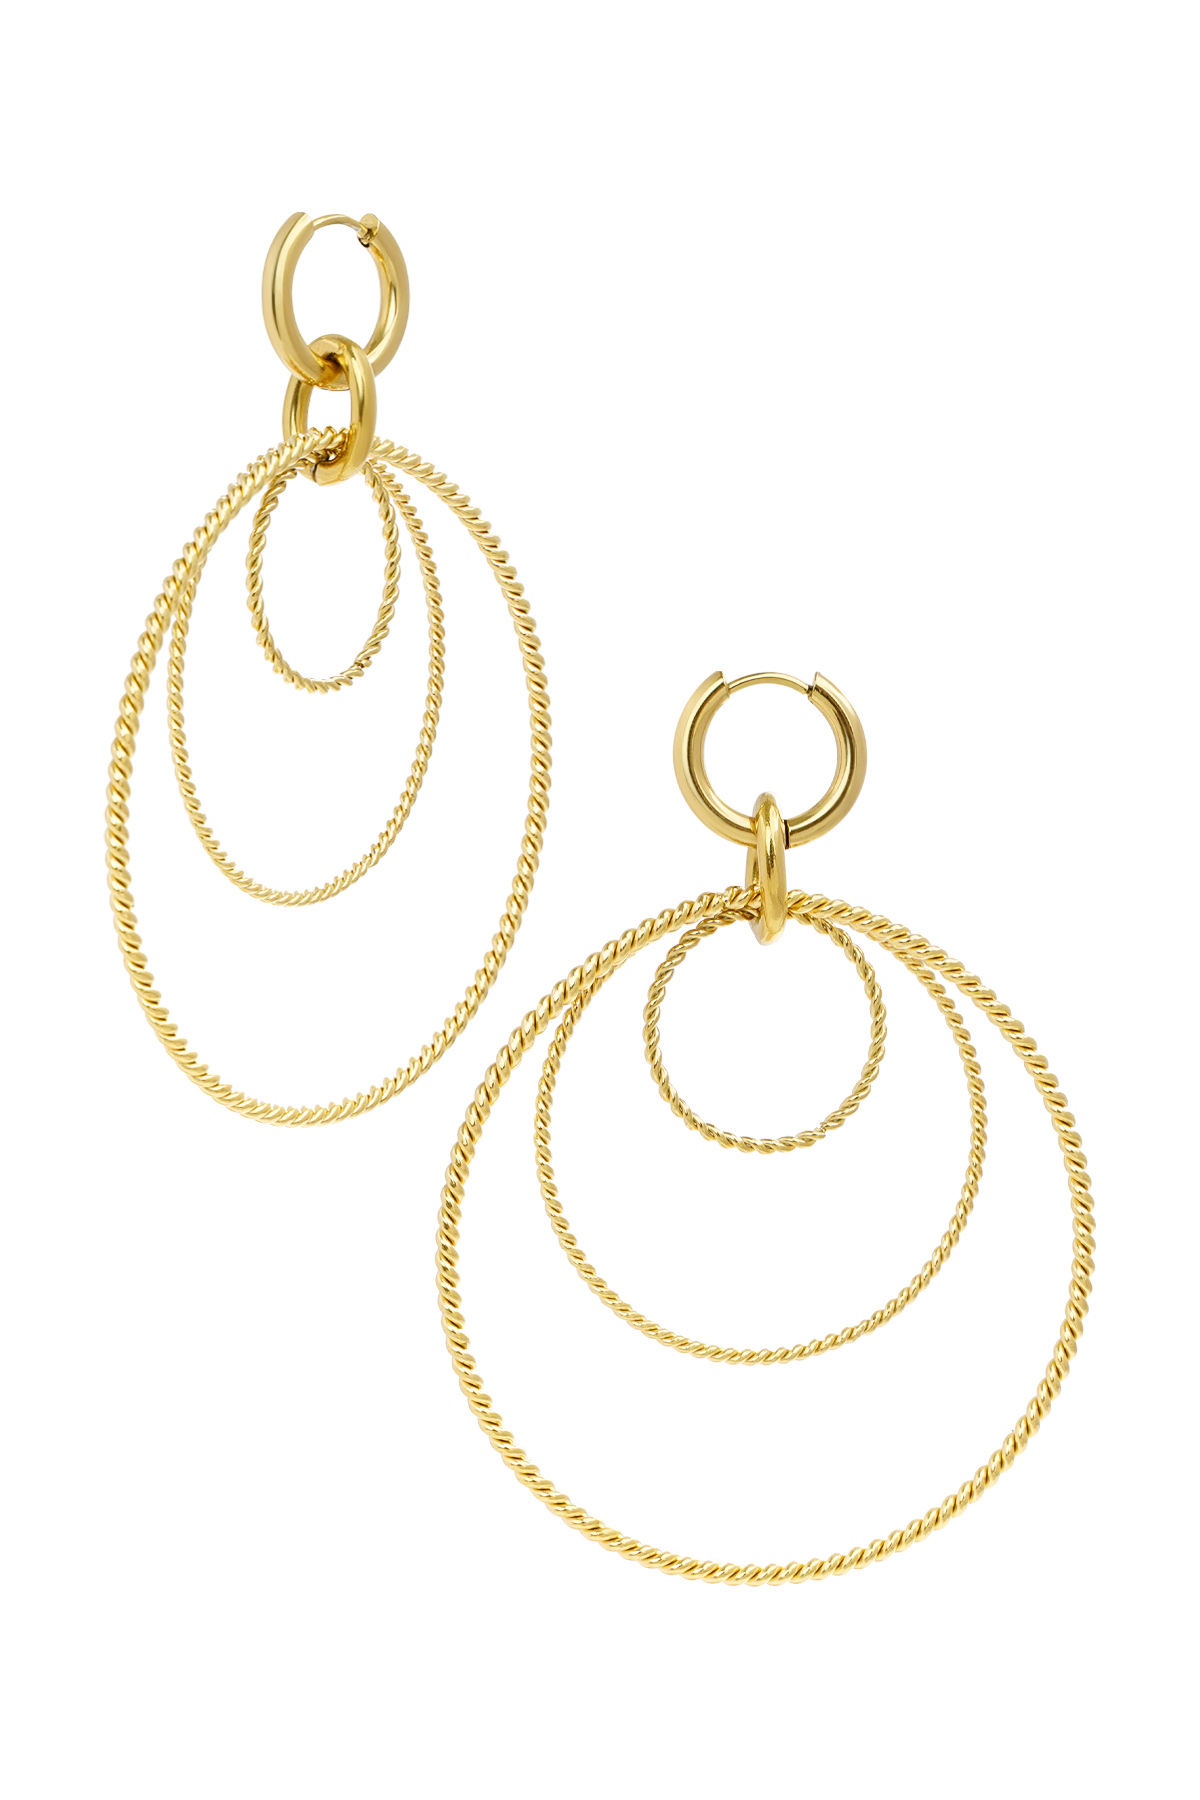 Earrings different rounds - gold